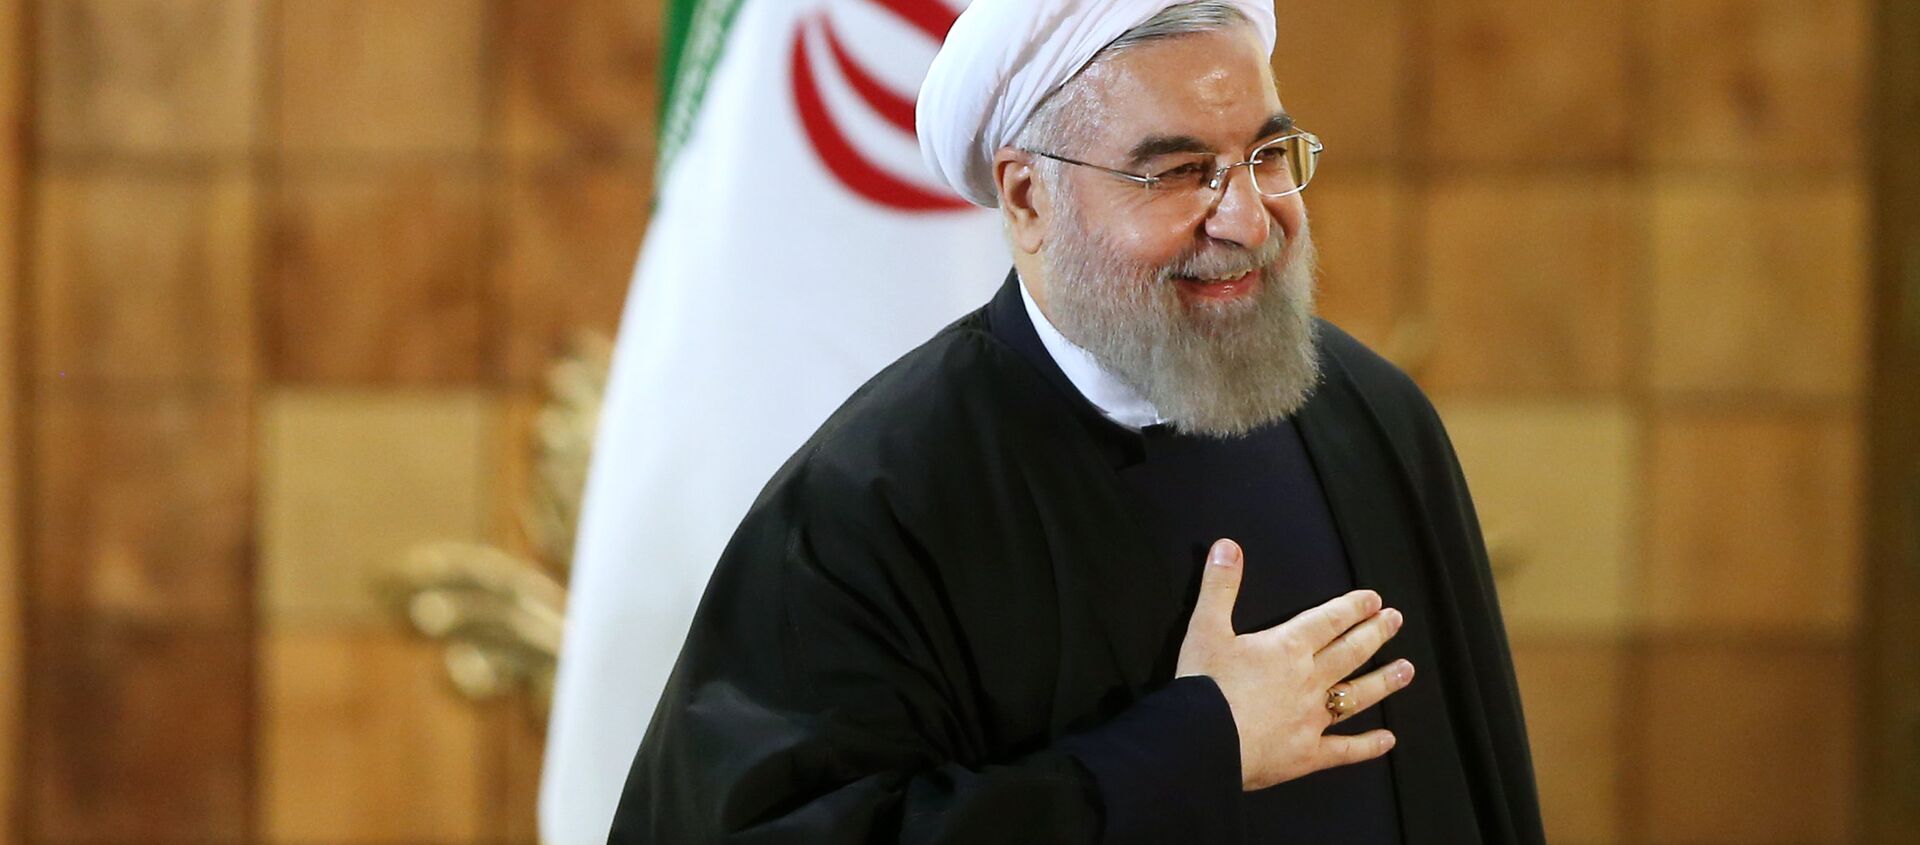 Iran's President Hassan Rouhani gestures at the conclusion of his press conference, in Tehran, Iran, Sunday, Jan. 17, 2016.  - Sputnik International, 1920, 01.10.2019